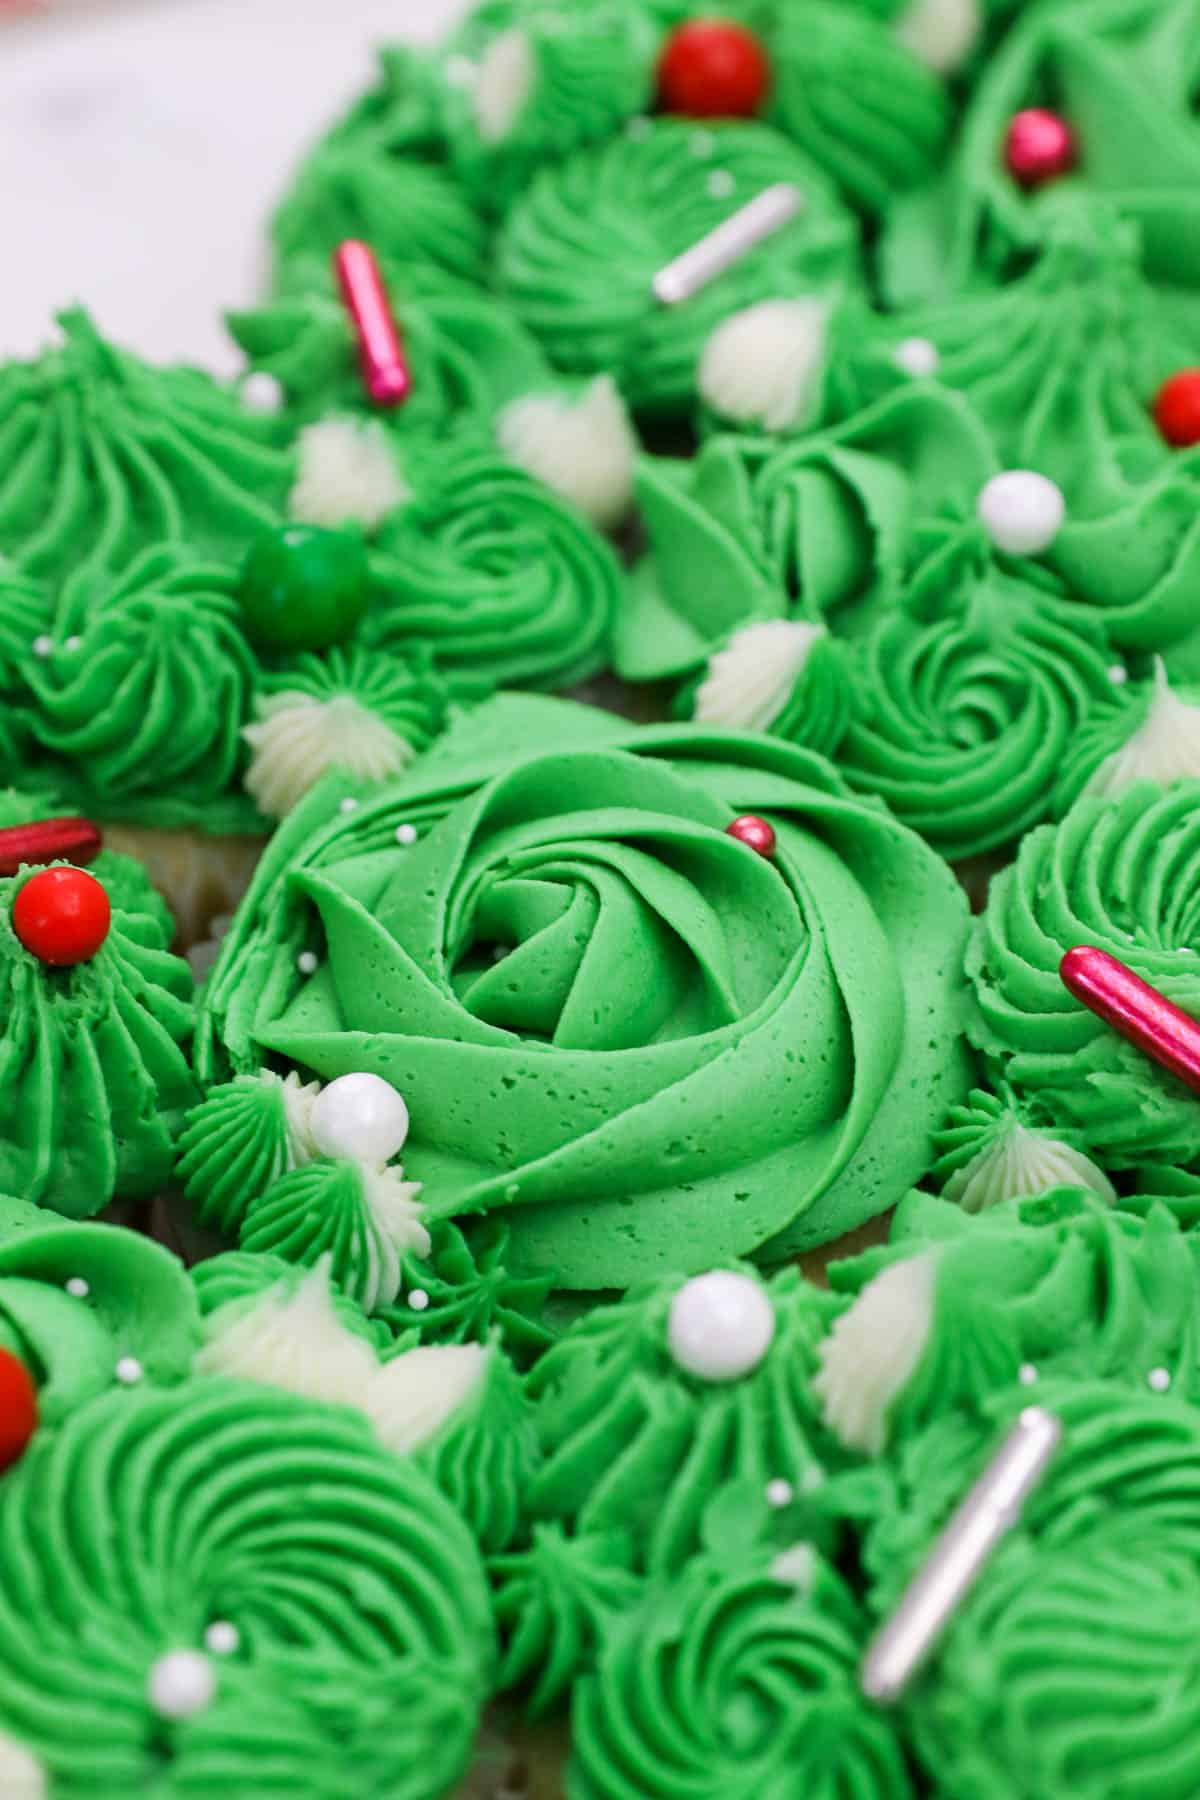 A close-up shot of cupcakes frosted with green buttercream designs and topped with sprinkles